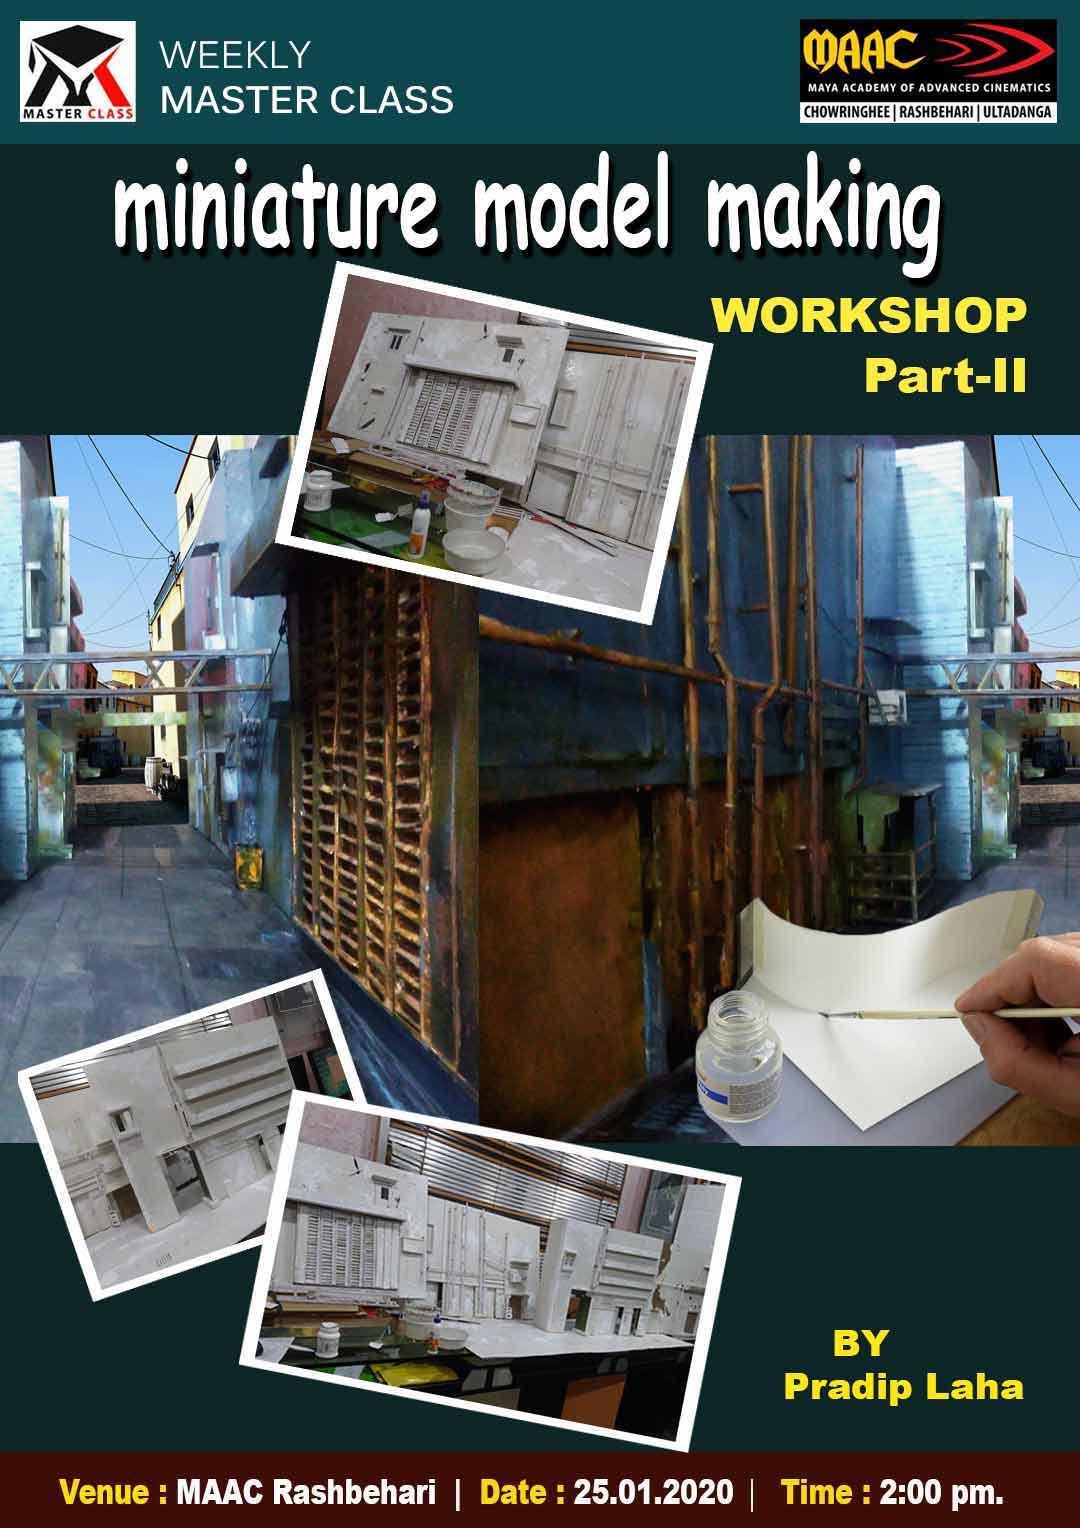 Weekly Master Class on Miniature Model Making Workshop Phase 2